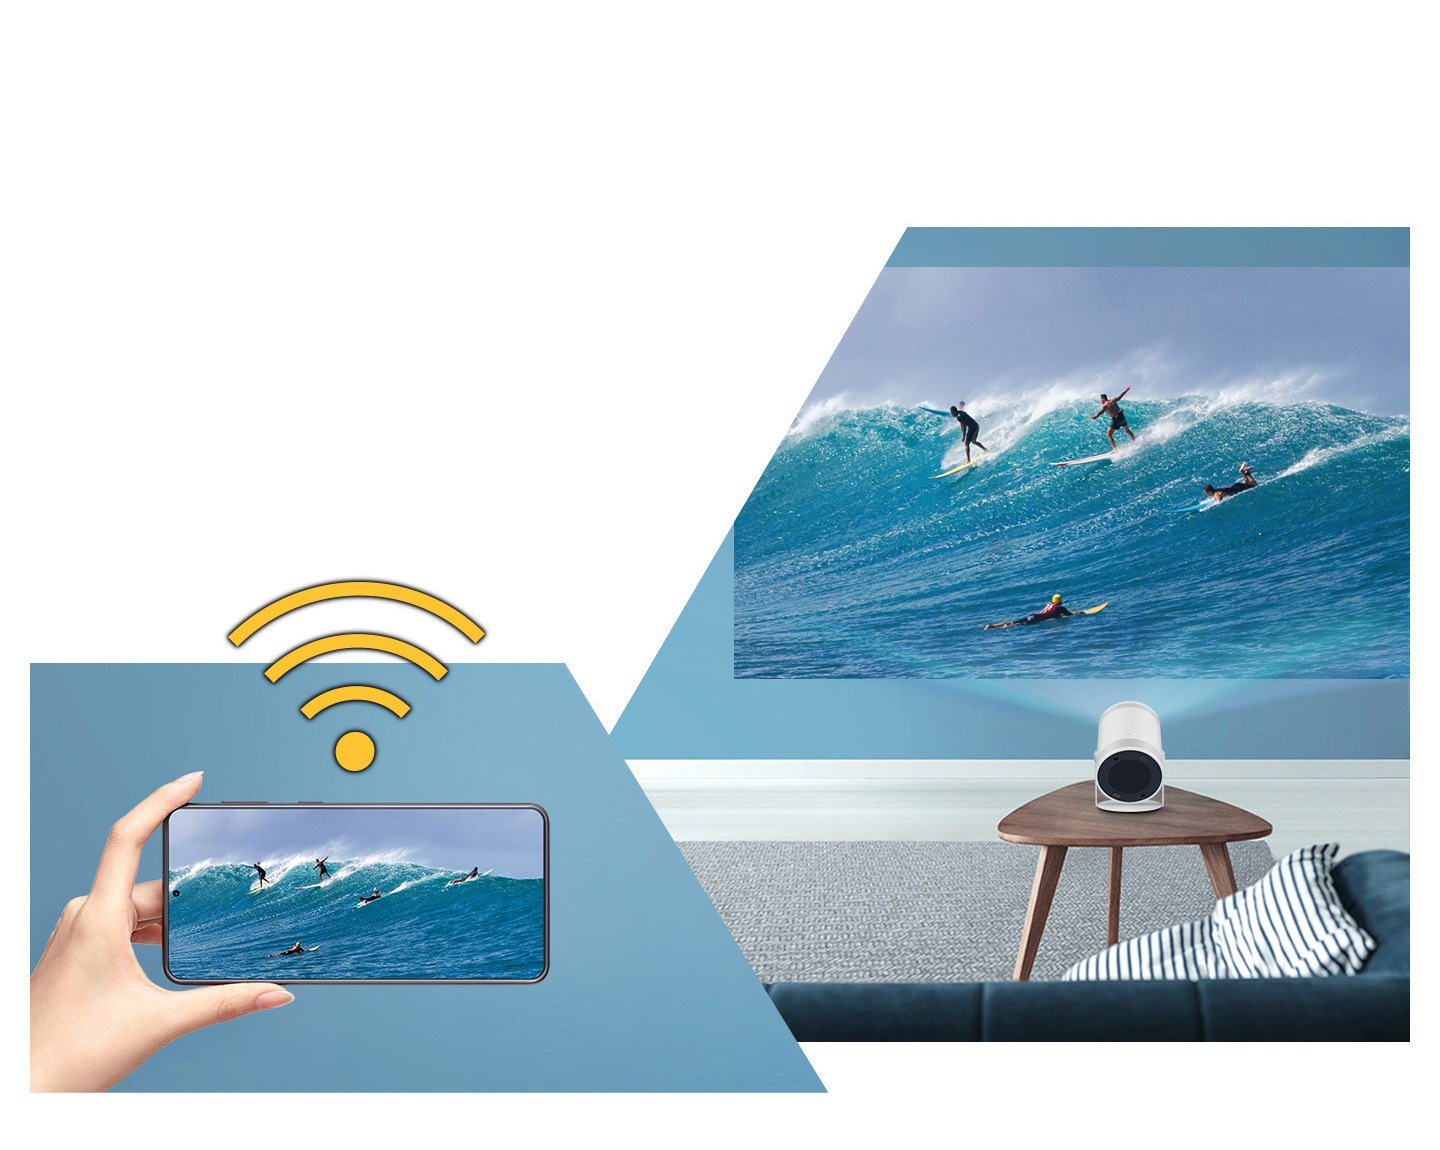 Wi-Fi sign over a hand holding a mobile device. A surfing picture on the mobile device is mirrored on The Freestyle's large screen.